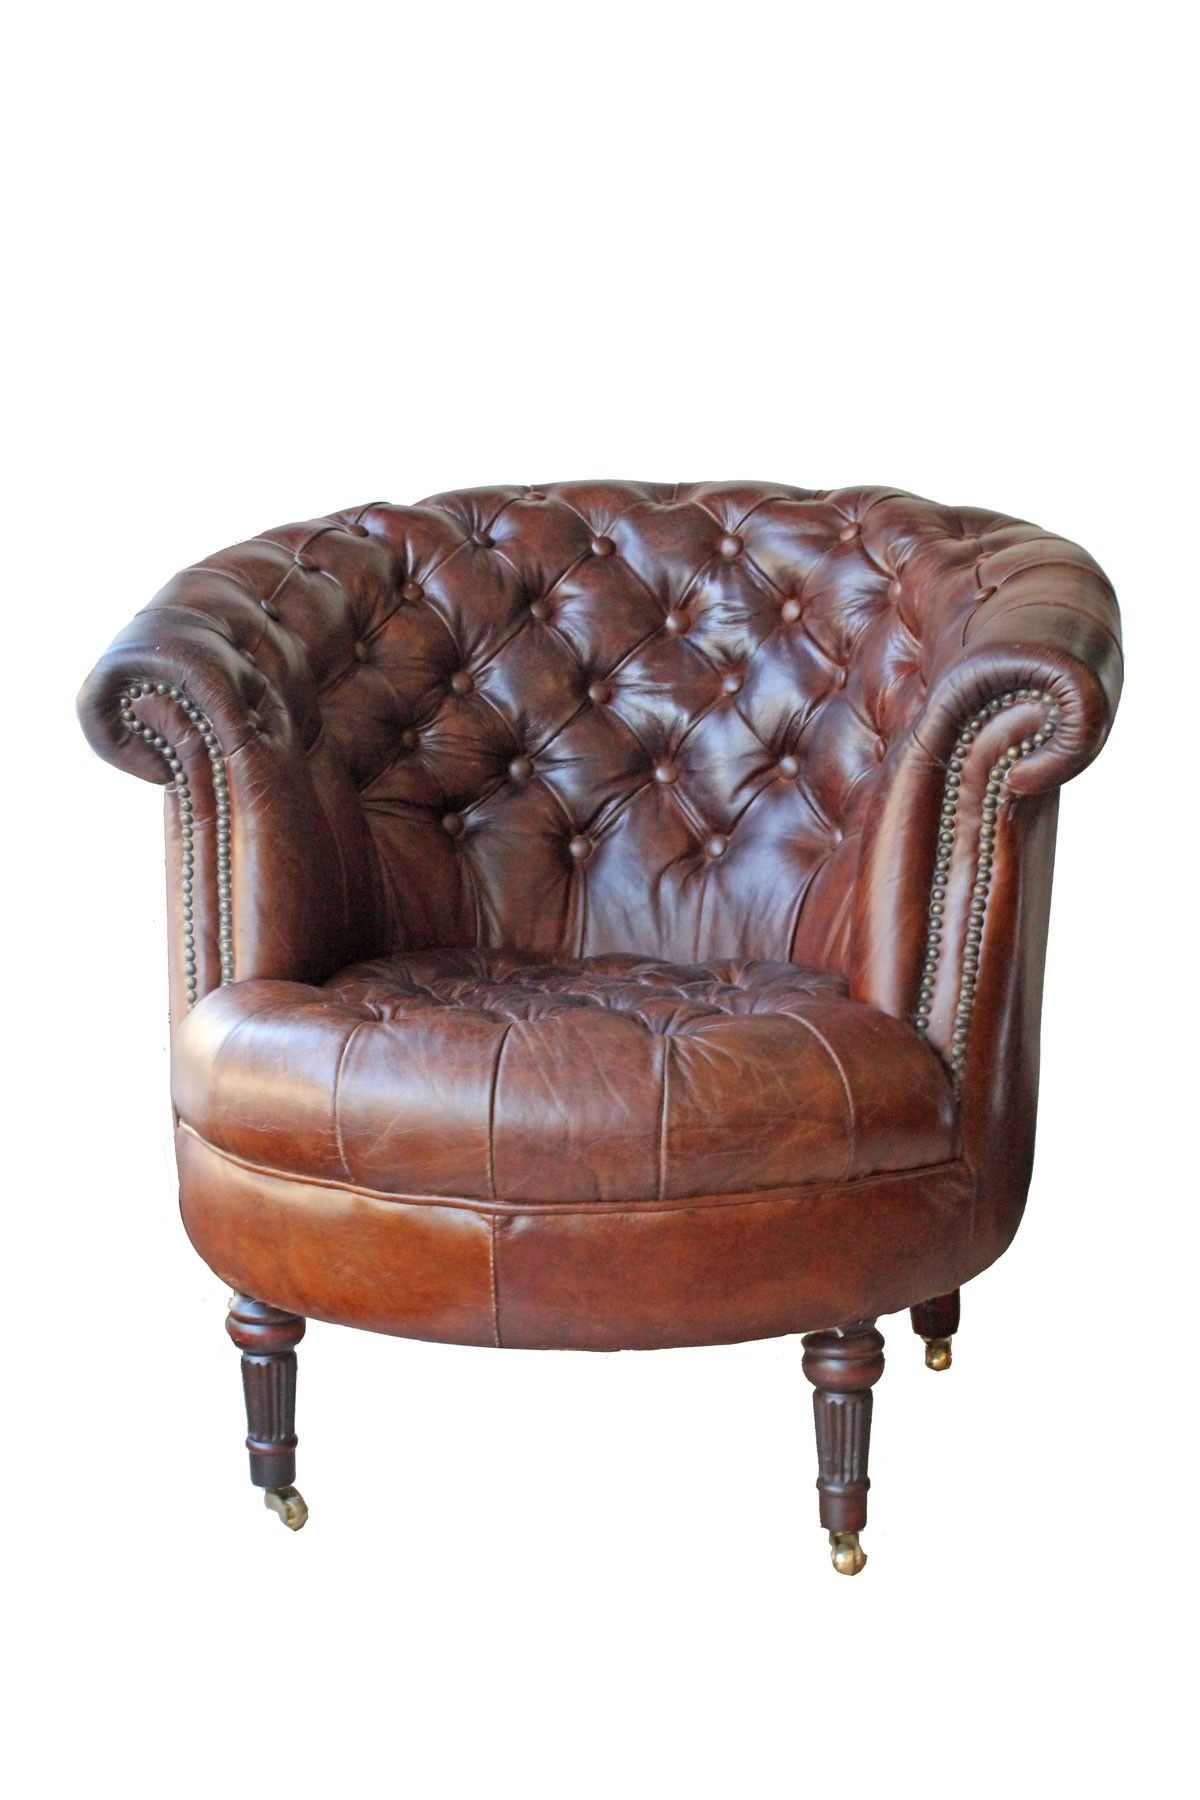 Leather barrel tufted chesterield brown leather chair on caster wheels